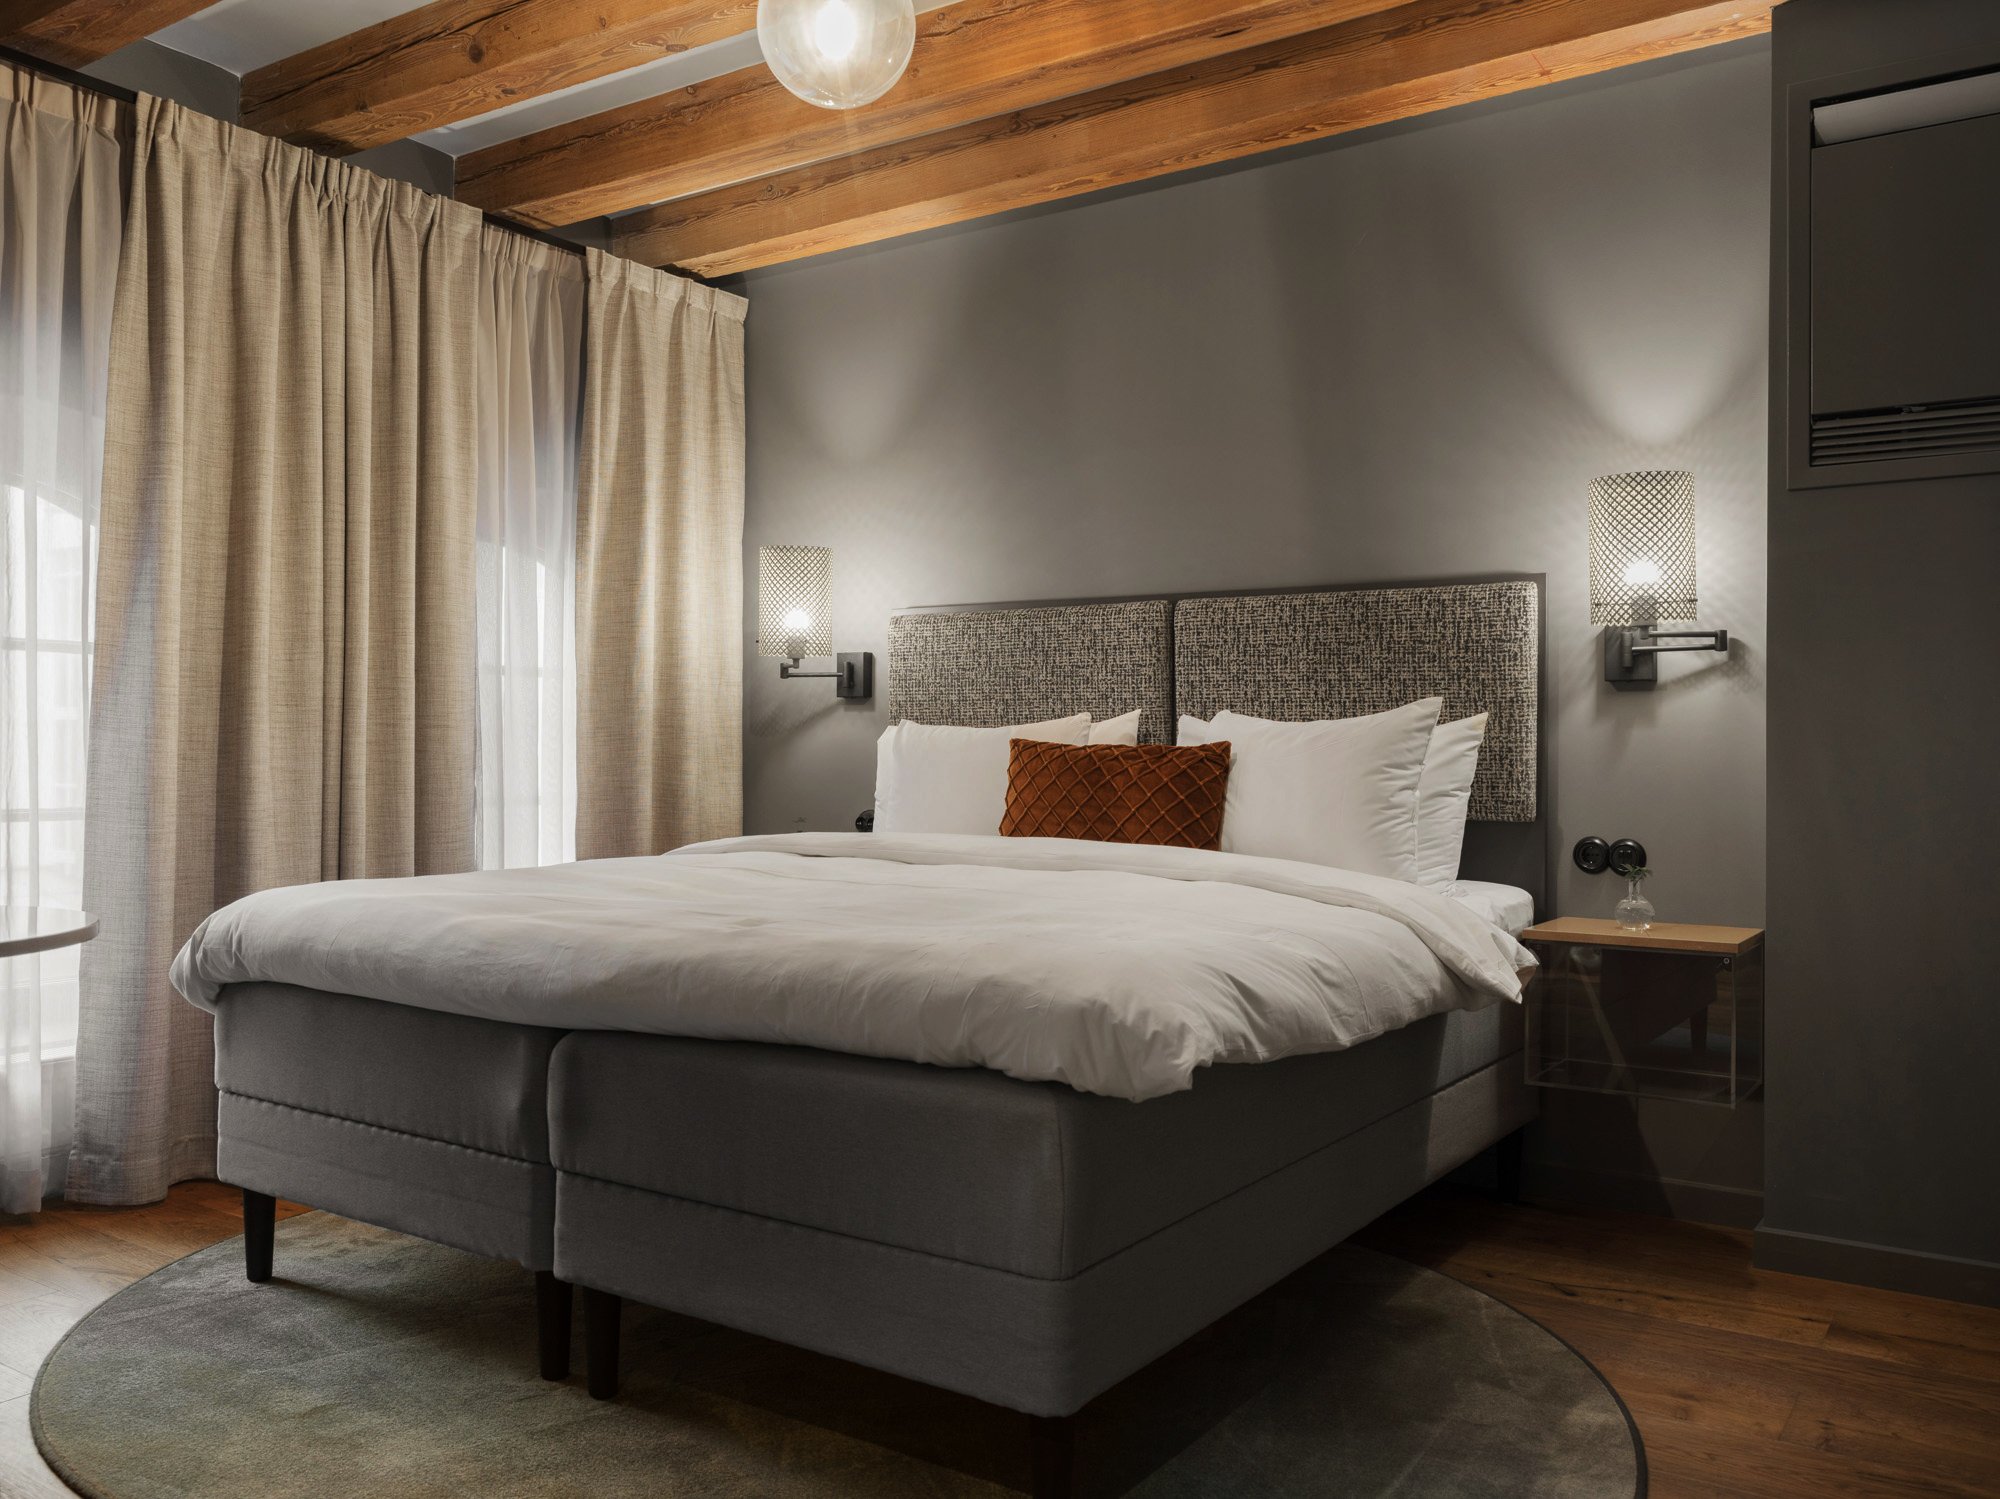 Bright hotel room with bed, beige curtains and wooden beams in the ceiling